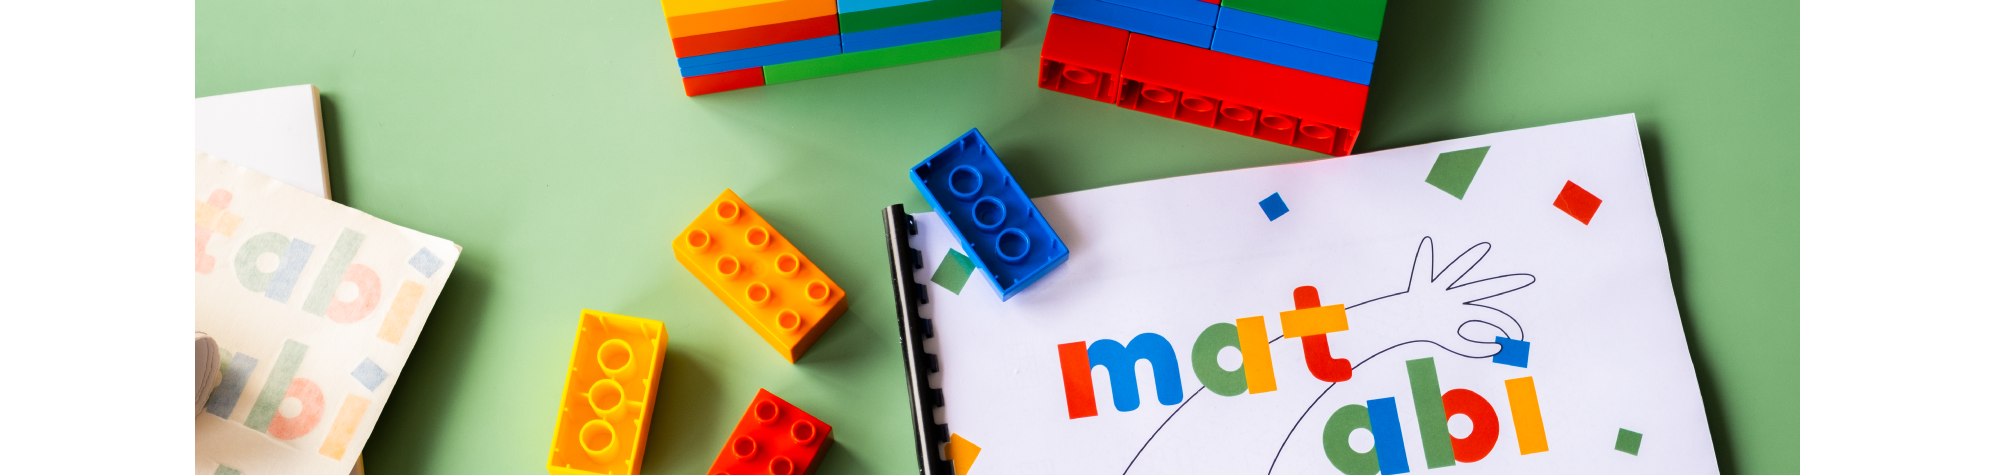 Matabì – learning one brick at the time